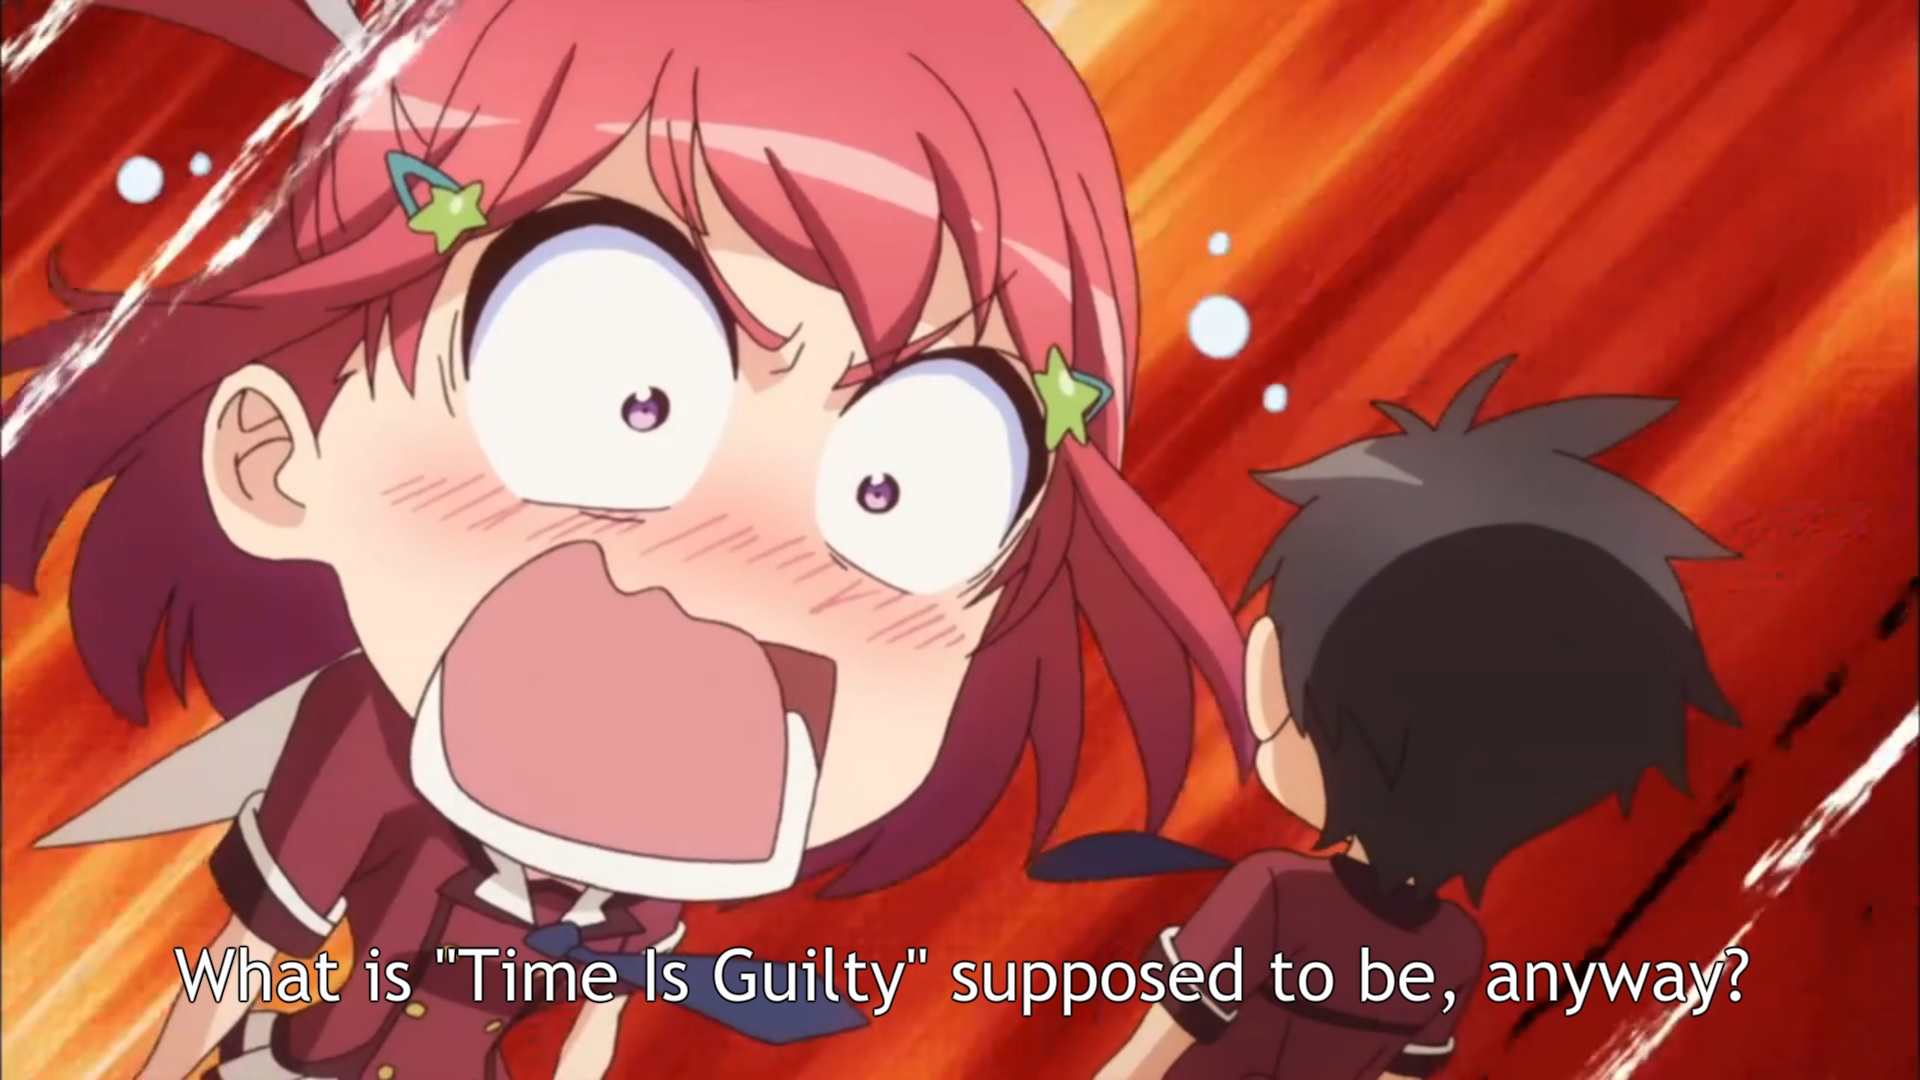 When supernatural battles became commonplace